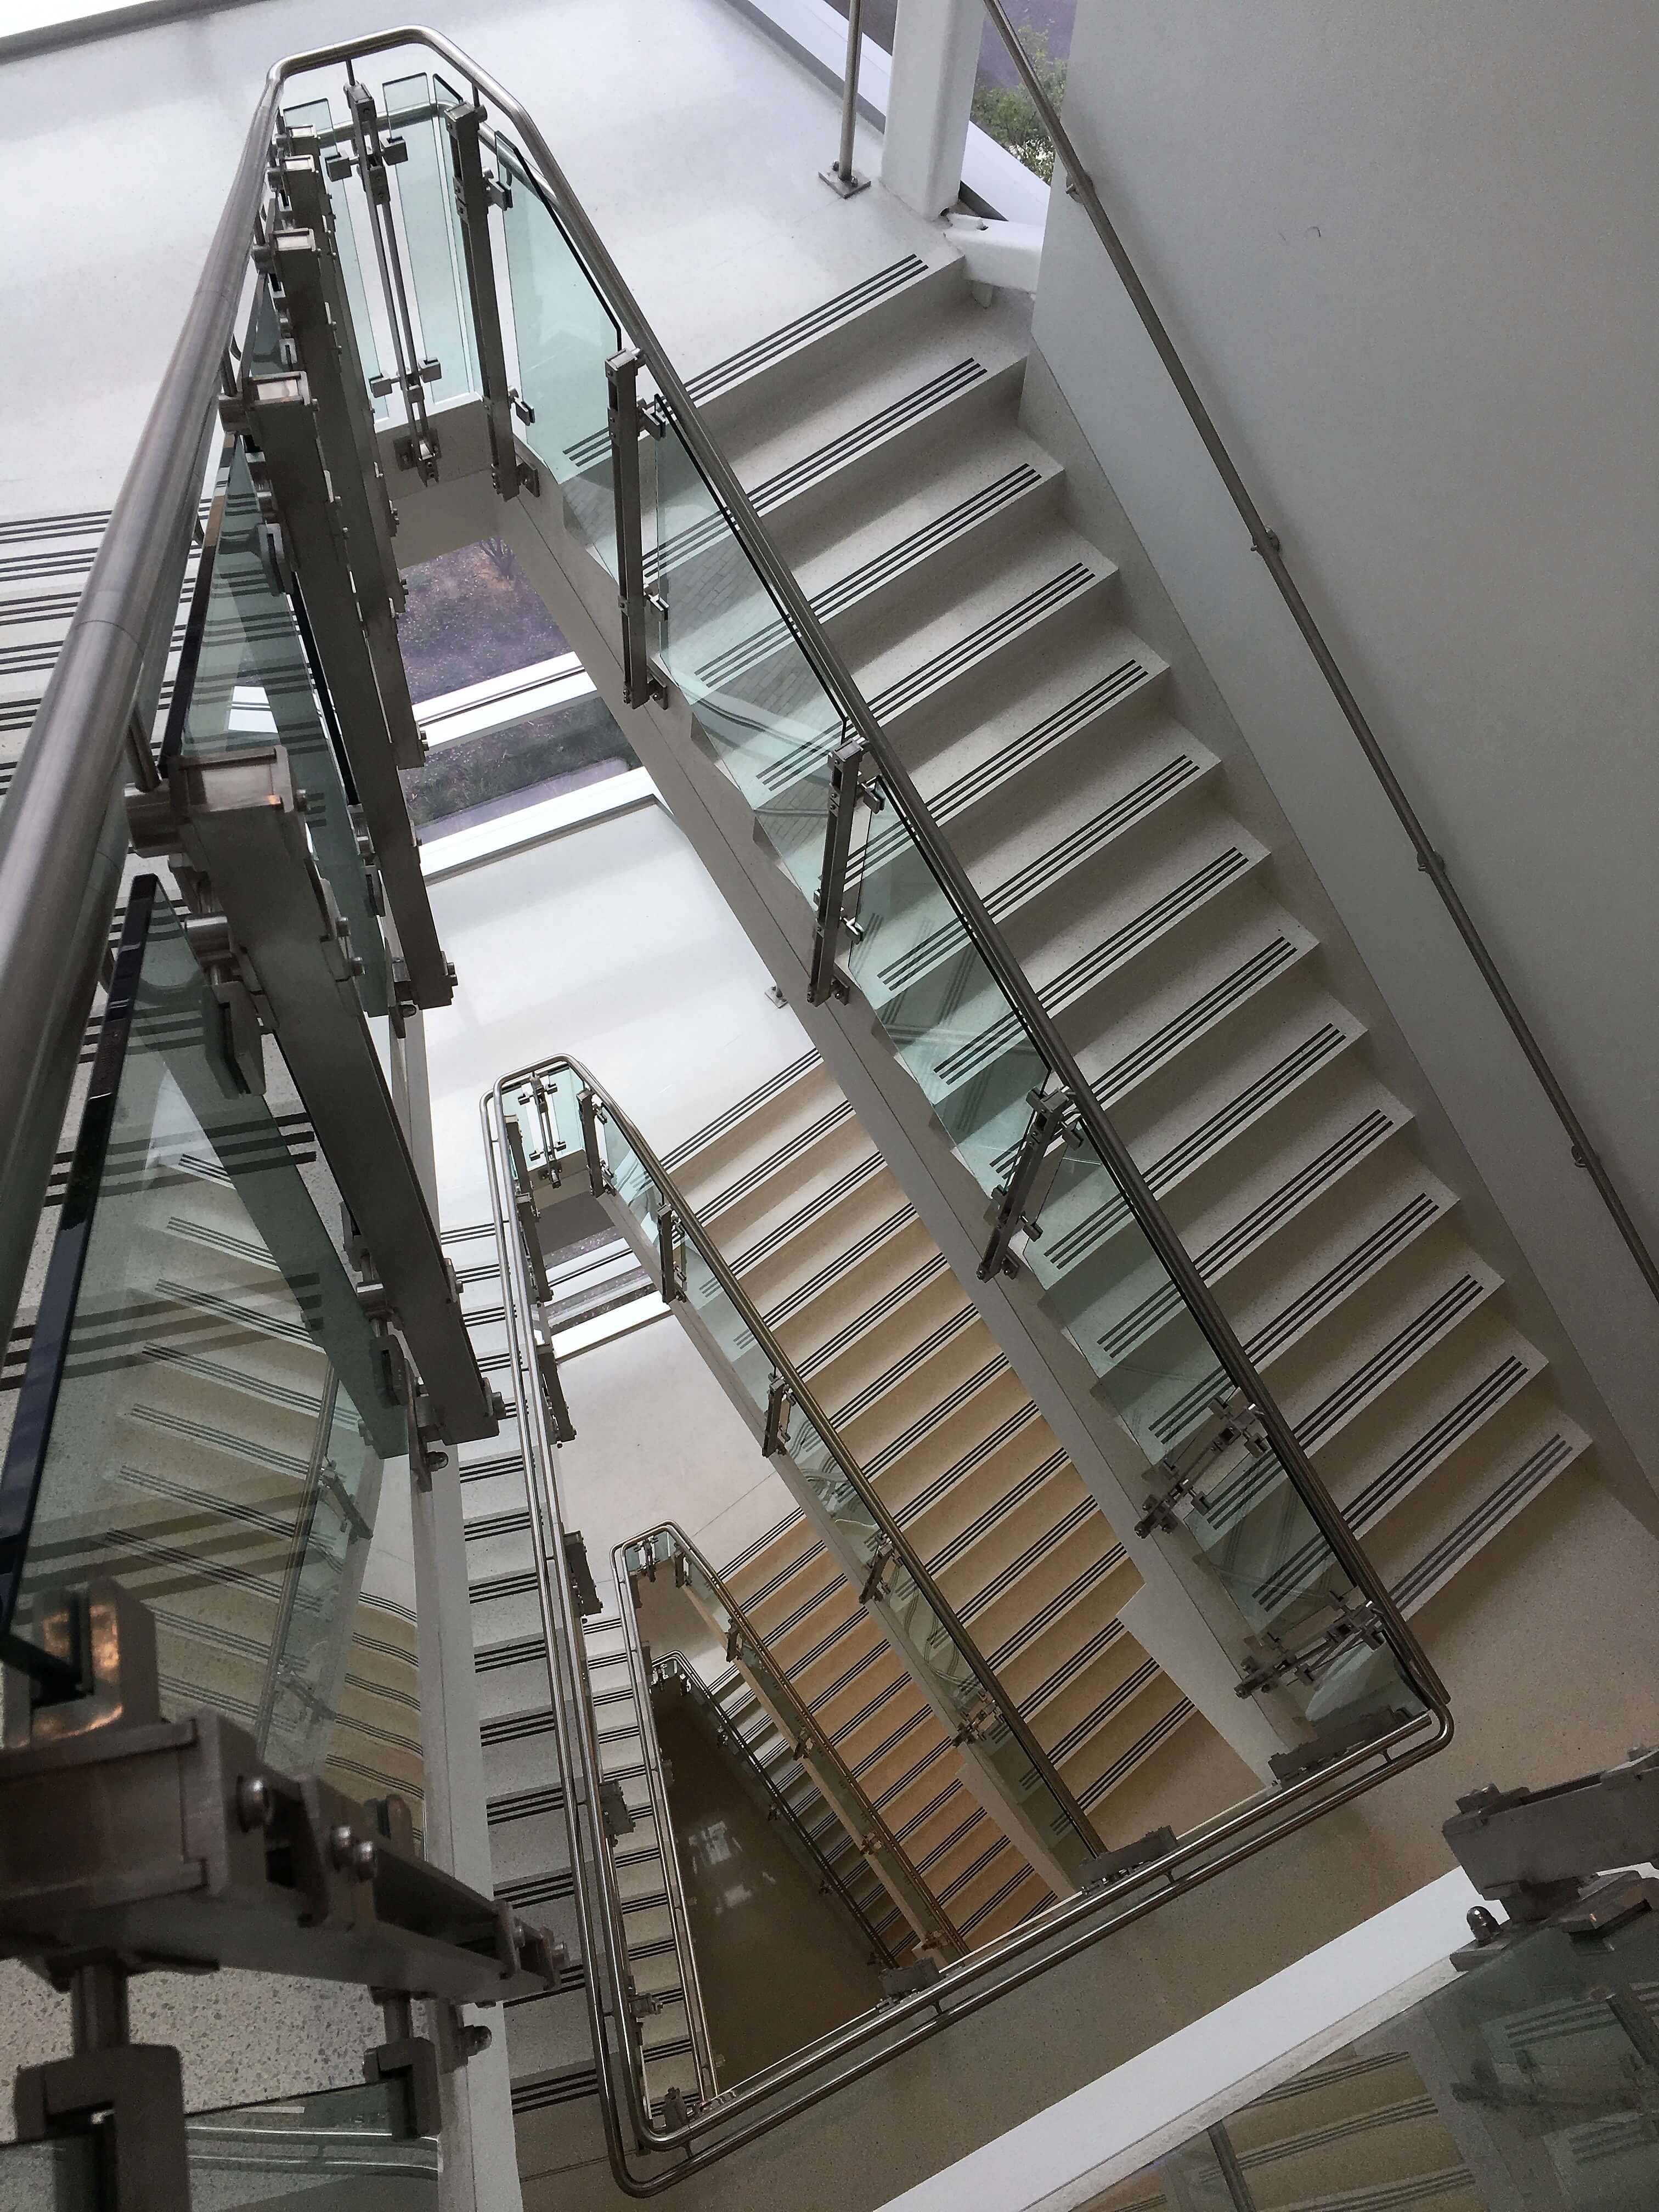 View down a stairwell of Inox guardrail with clear glass infill.